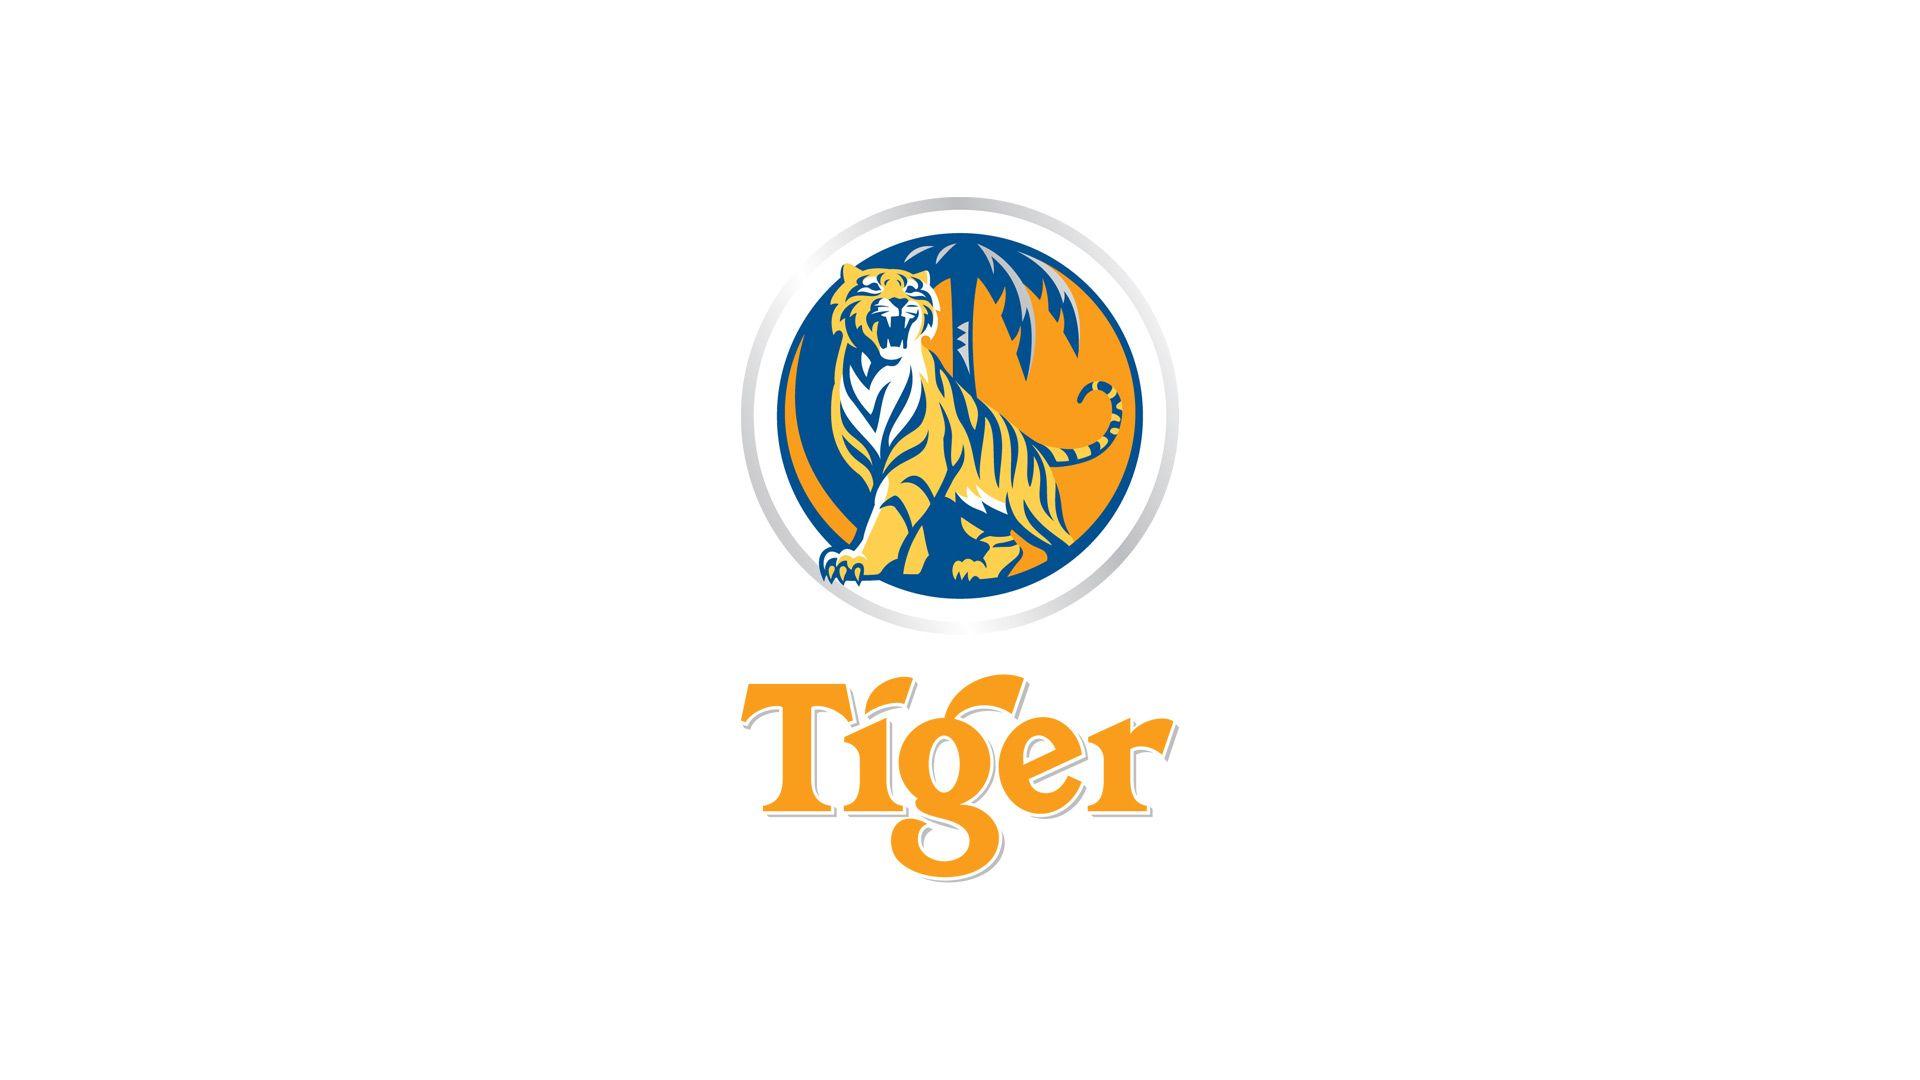 Tiger Beer Logo - Tiger Beer brings out the festive cheer, 'Have you been good this